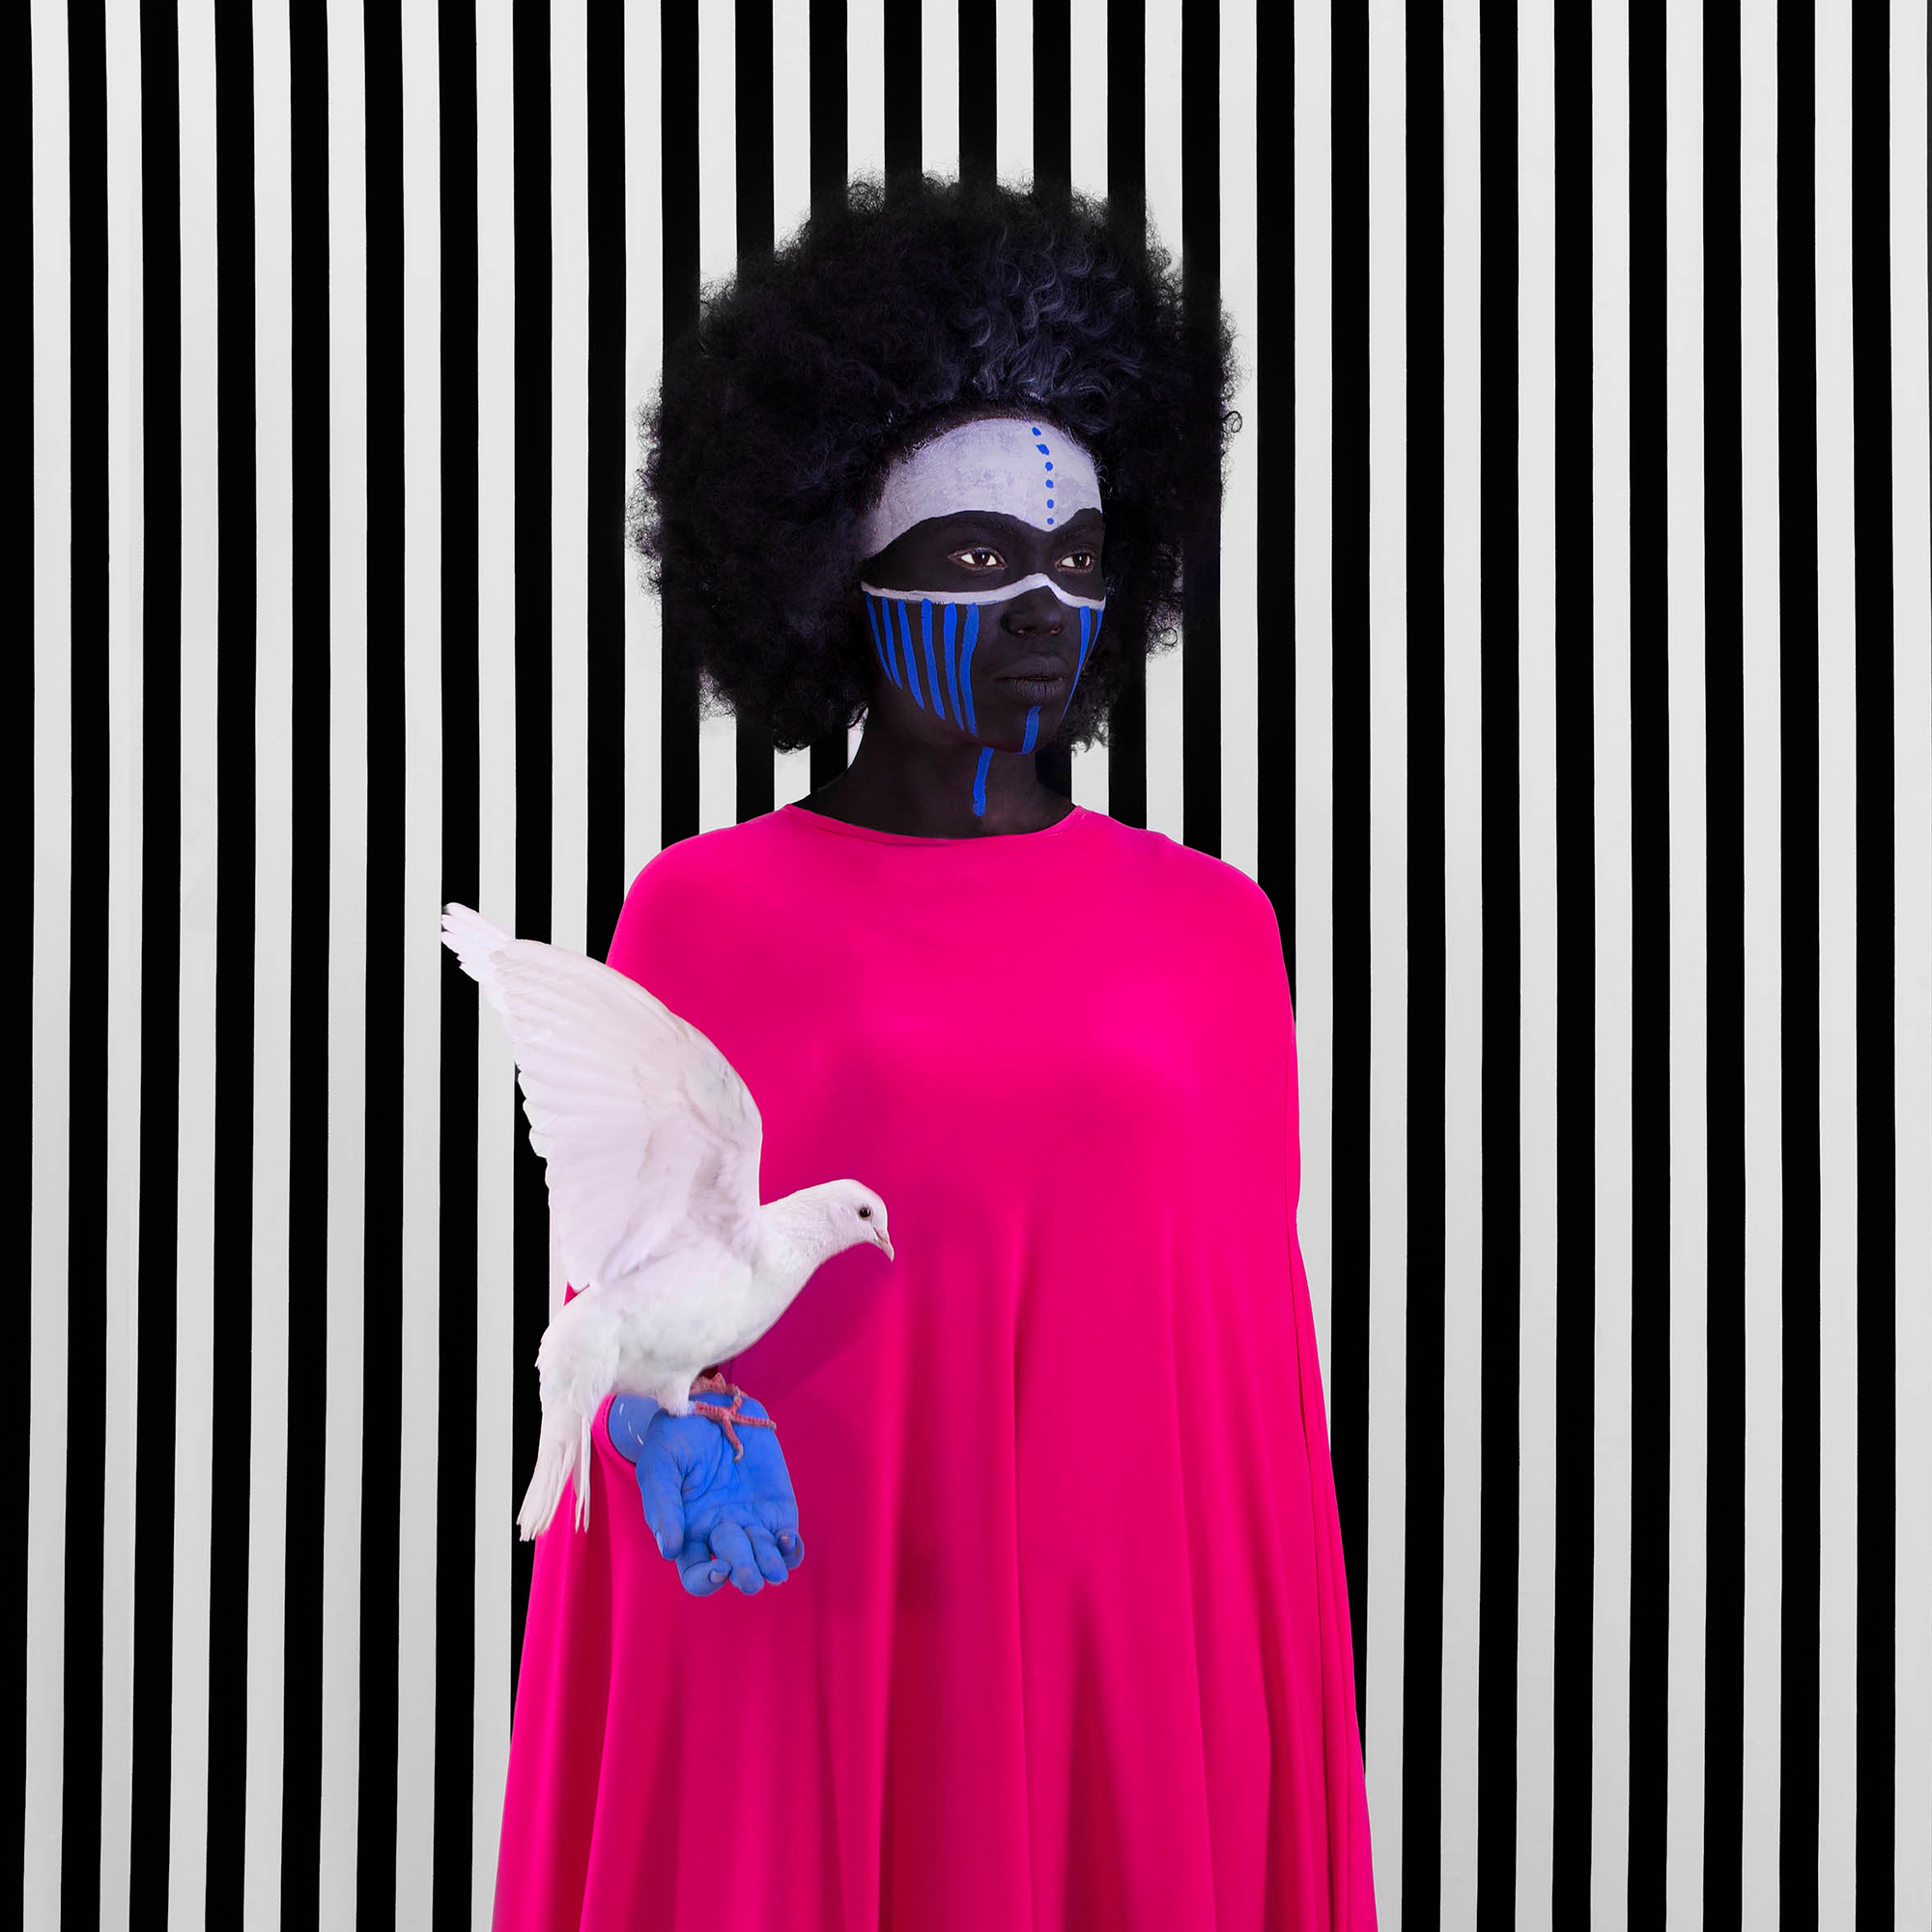     Aida Muluneh, Compromise, 2017. Courtesy of Jenkins-Johnson Gallery.

